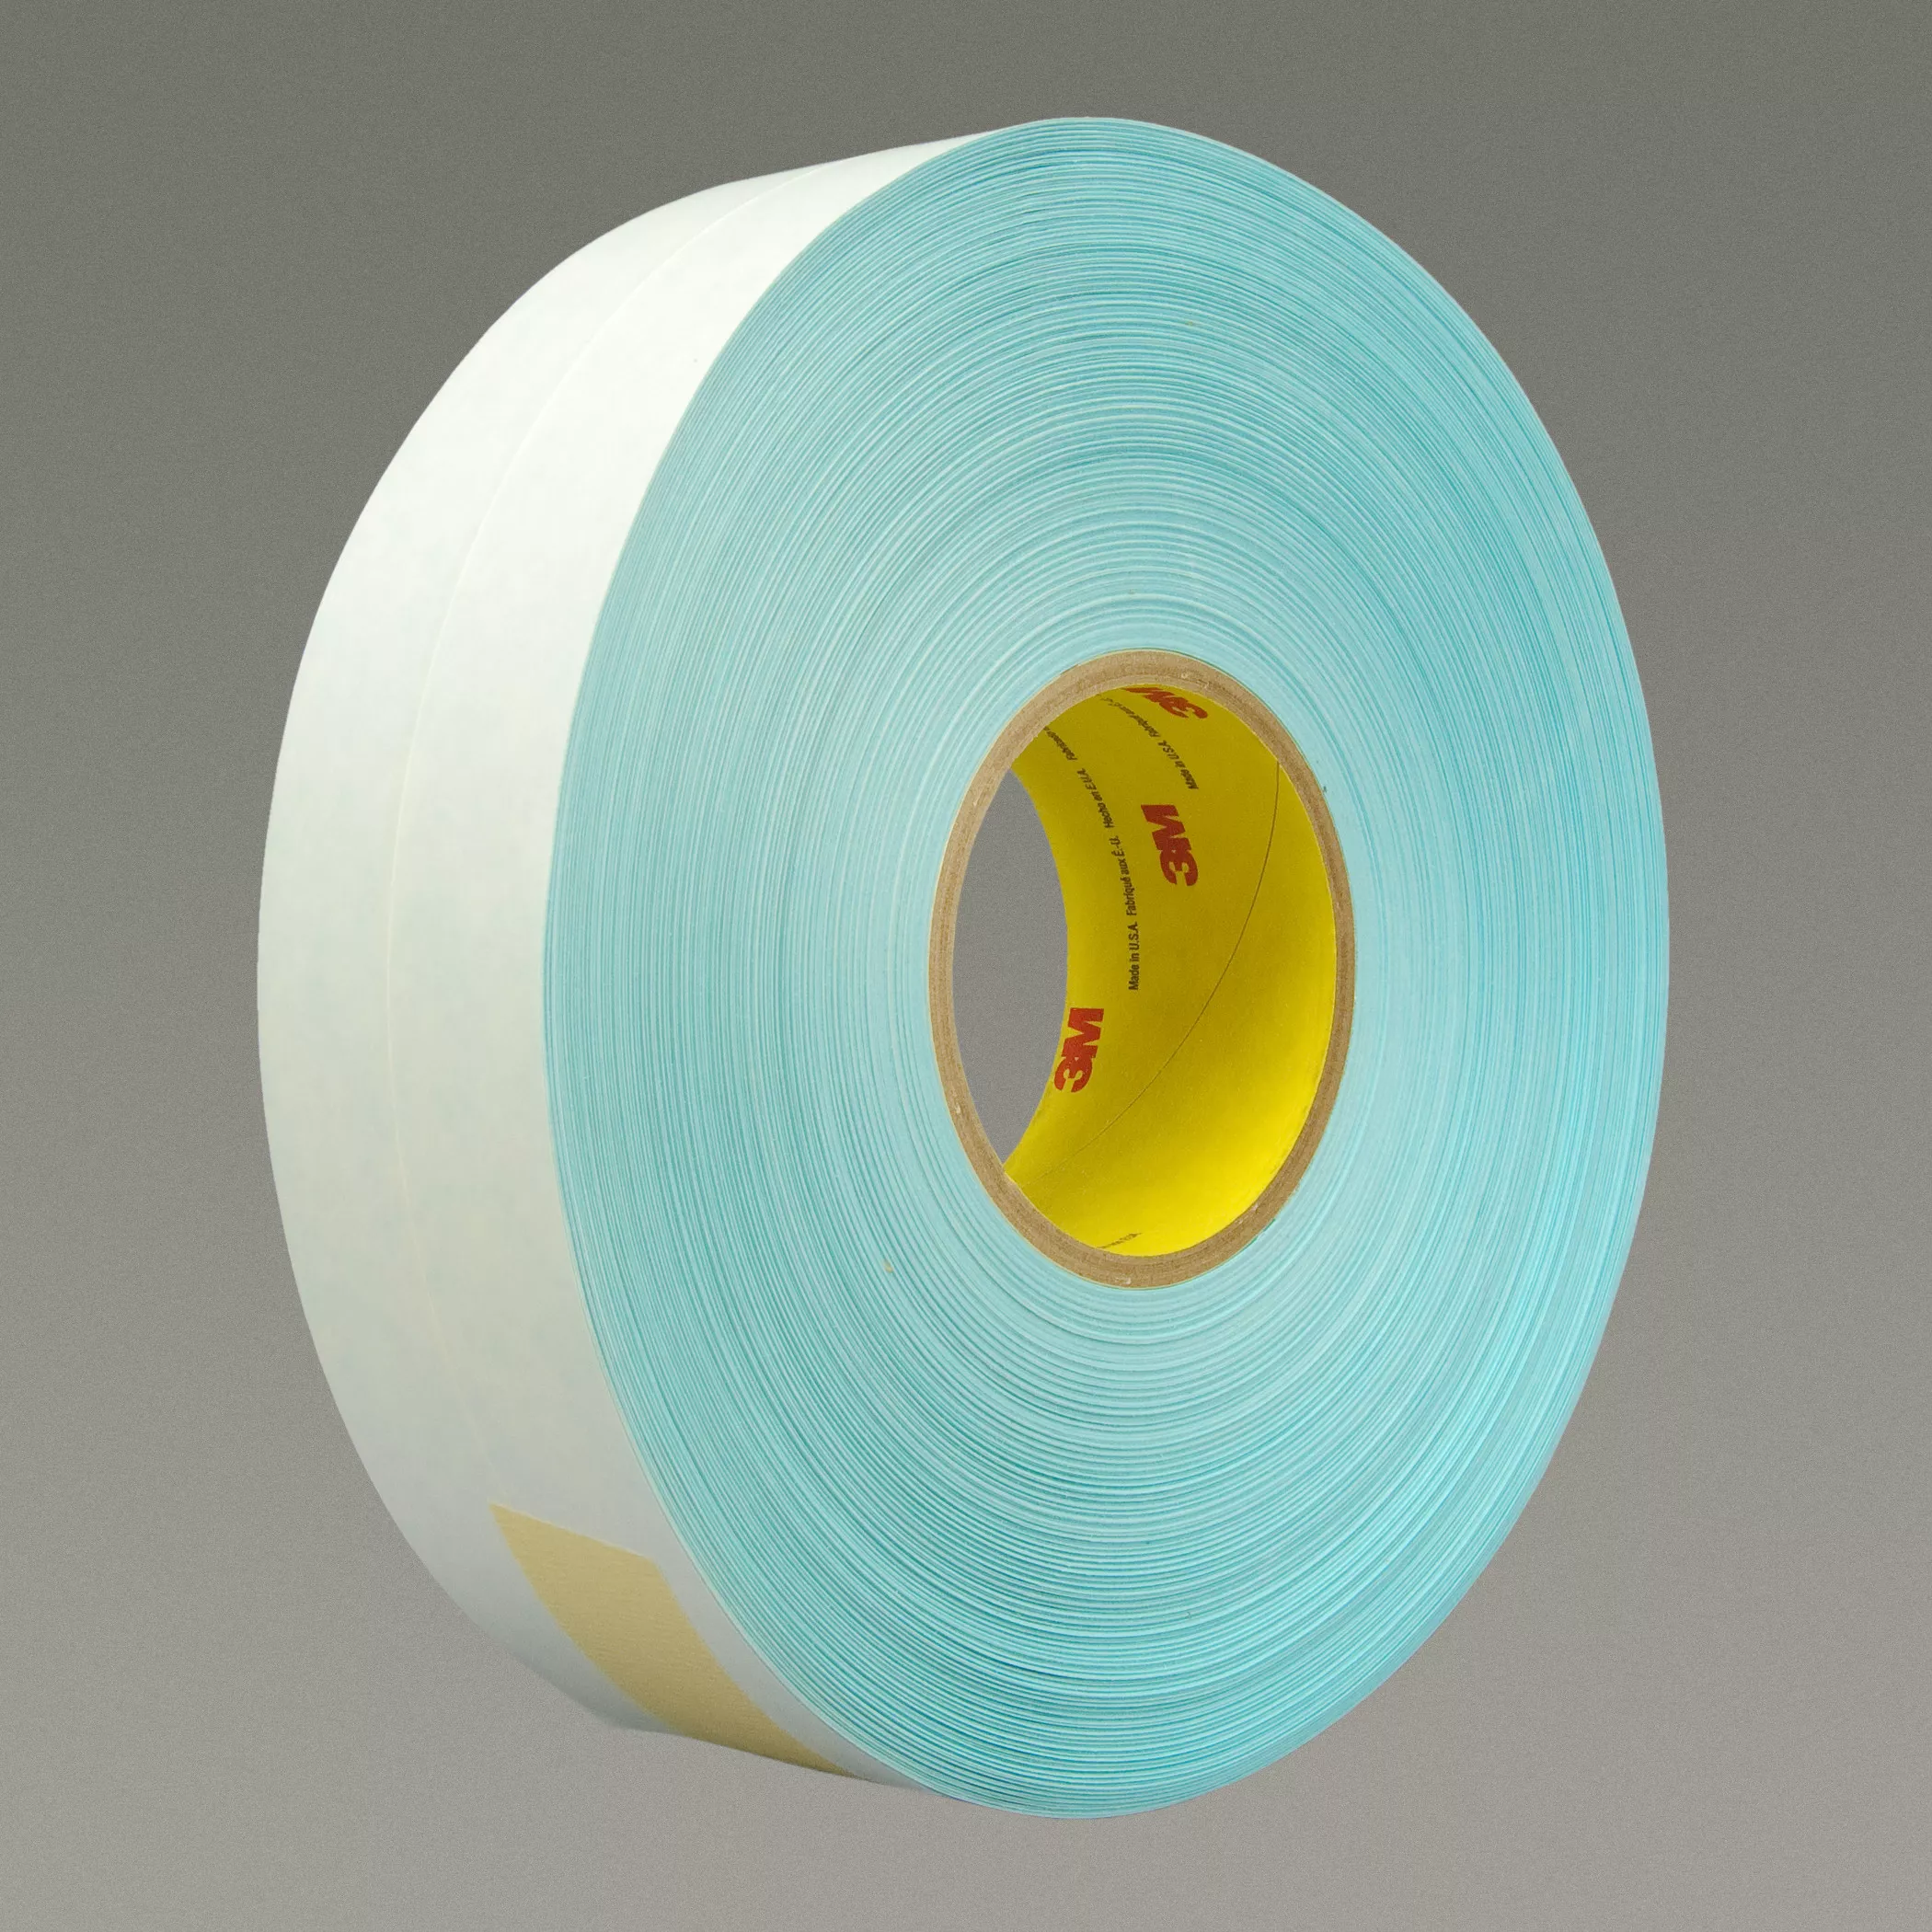 3M™ Printable Repulpable Single Coated Splicing Tape 9103, Blue, 72 mm
x
55 m, 4.1 mil, 12 Roll/Case